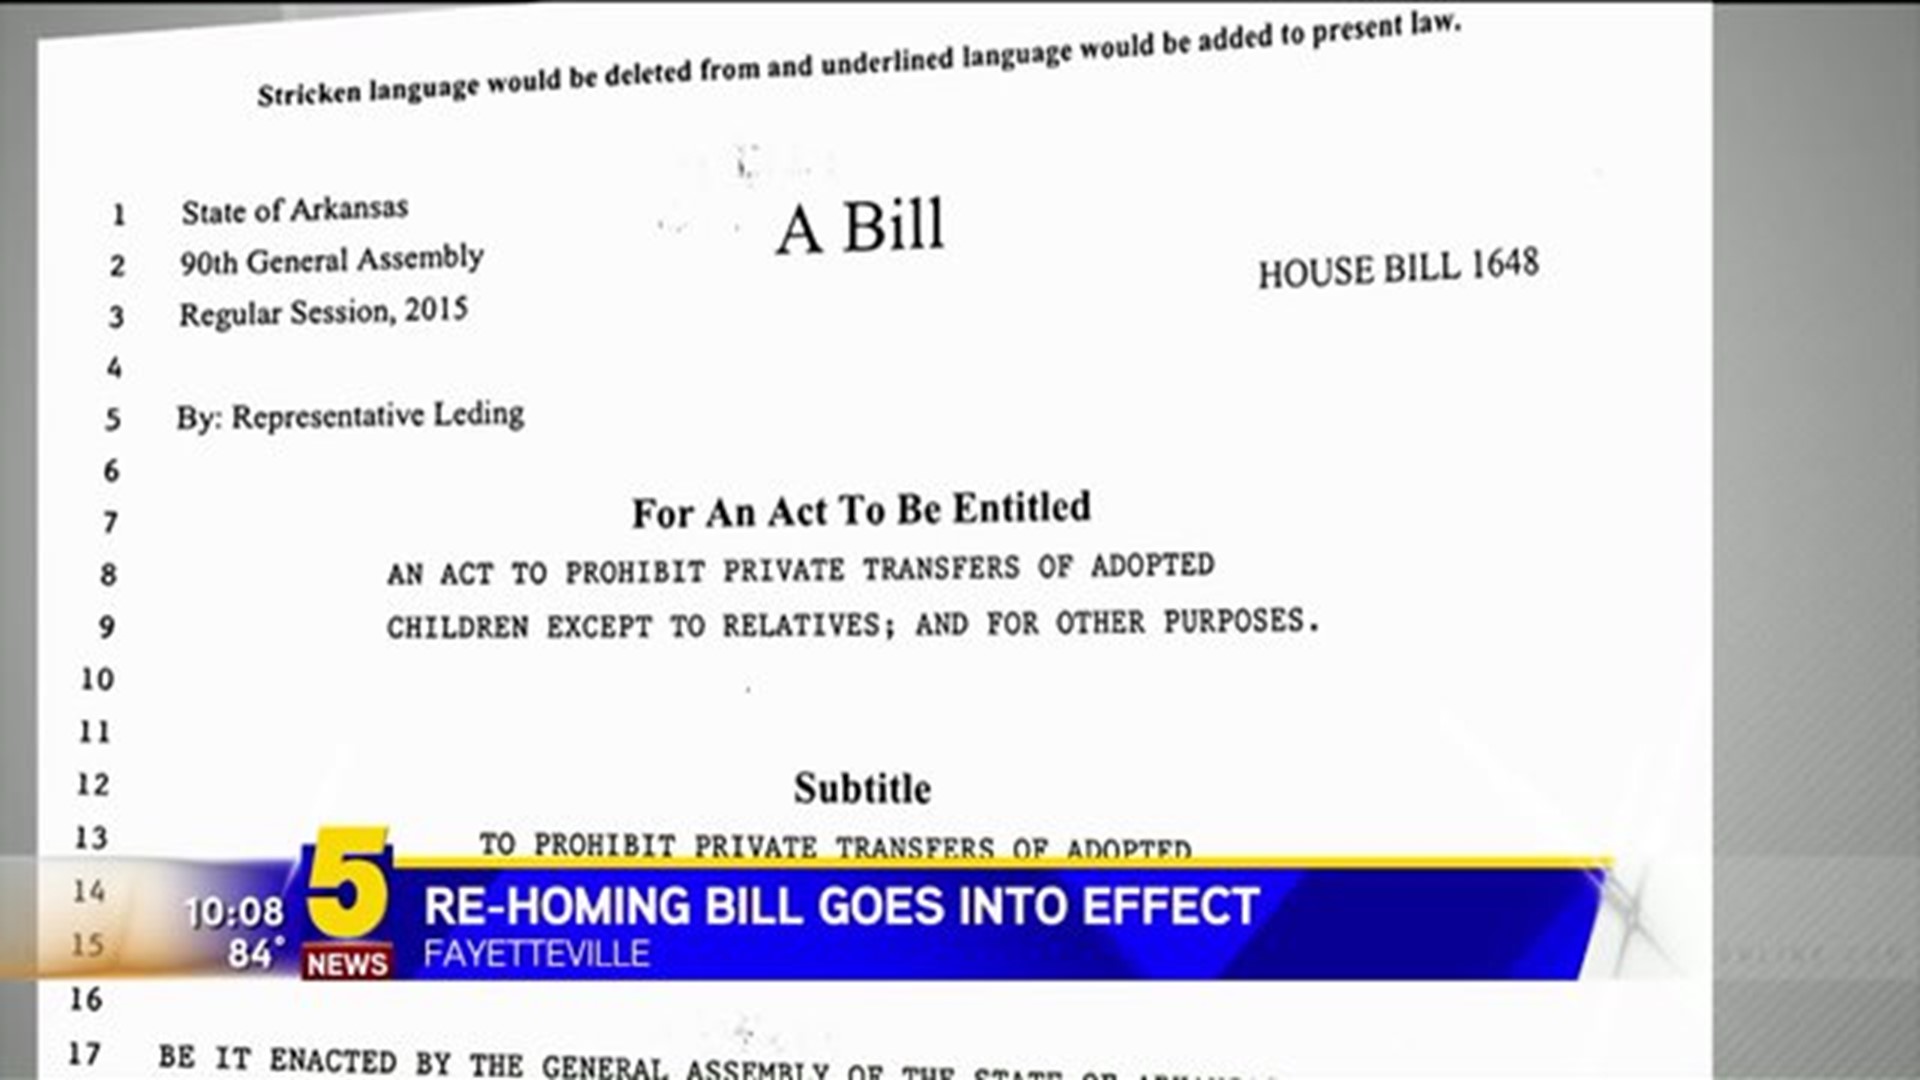 RE-HOMING LAW GOES INTO EFFECT